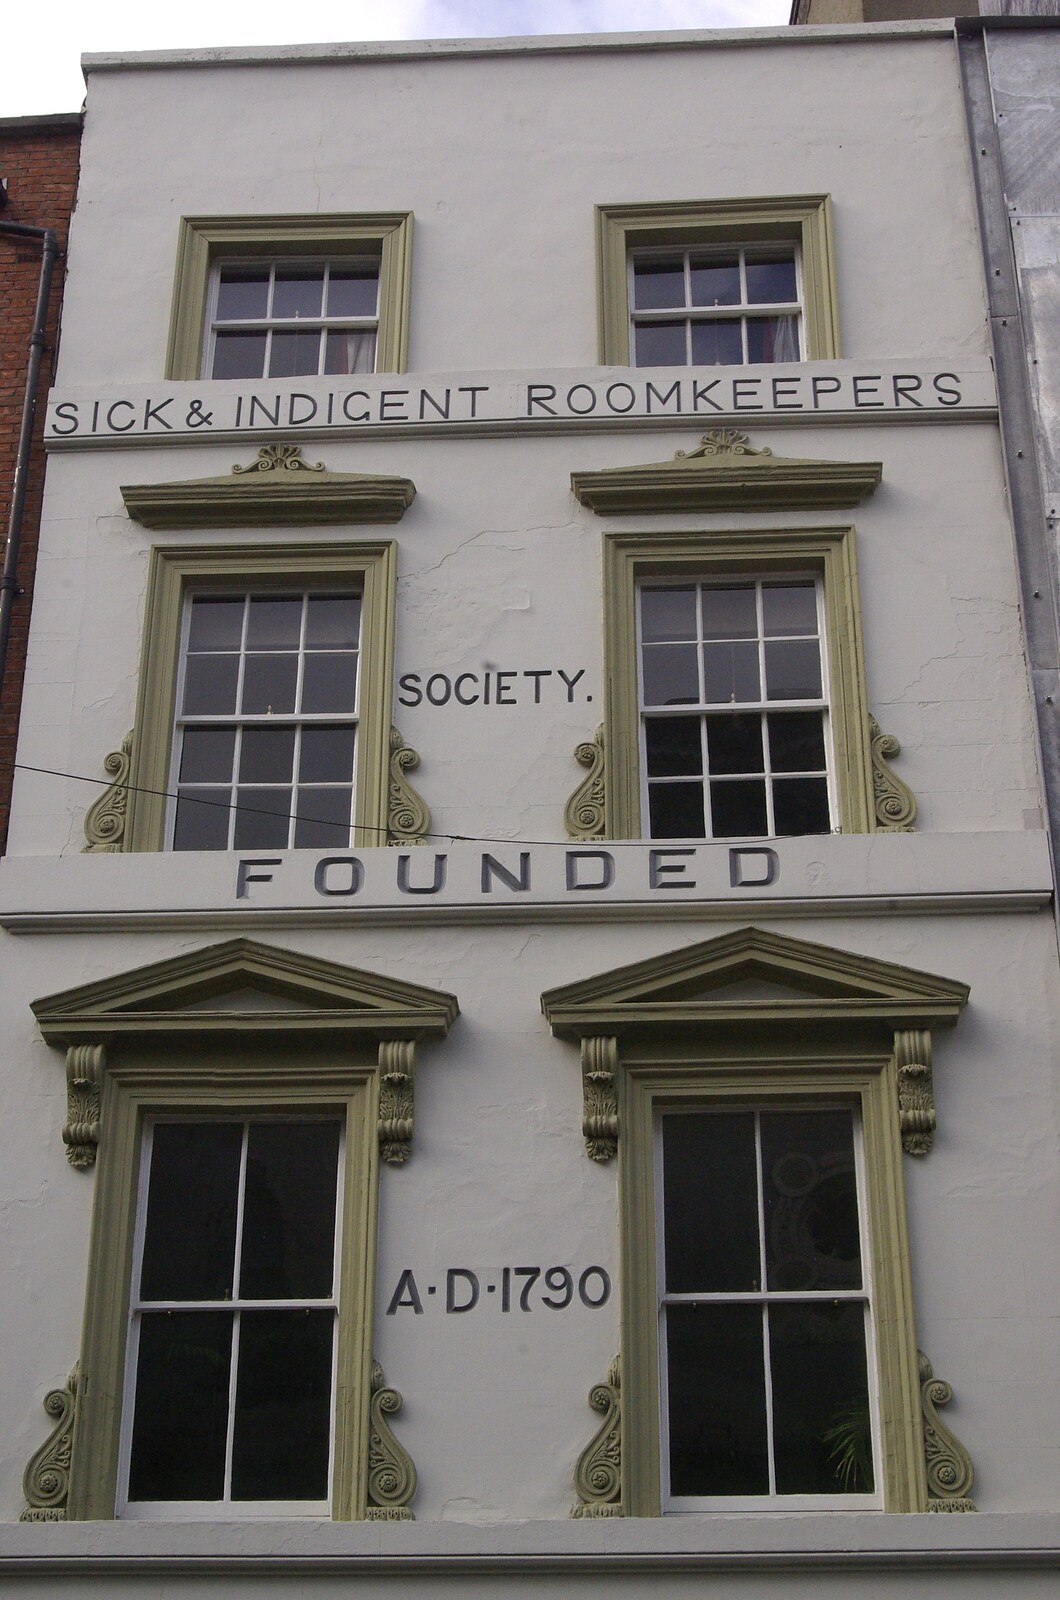 Blackrock and Dublin, Ireland - 24th September 2007: The Society of Sick and Indigent (impoverished) Roomkeepers building